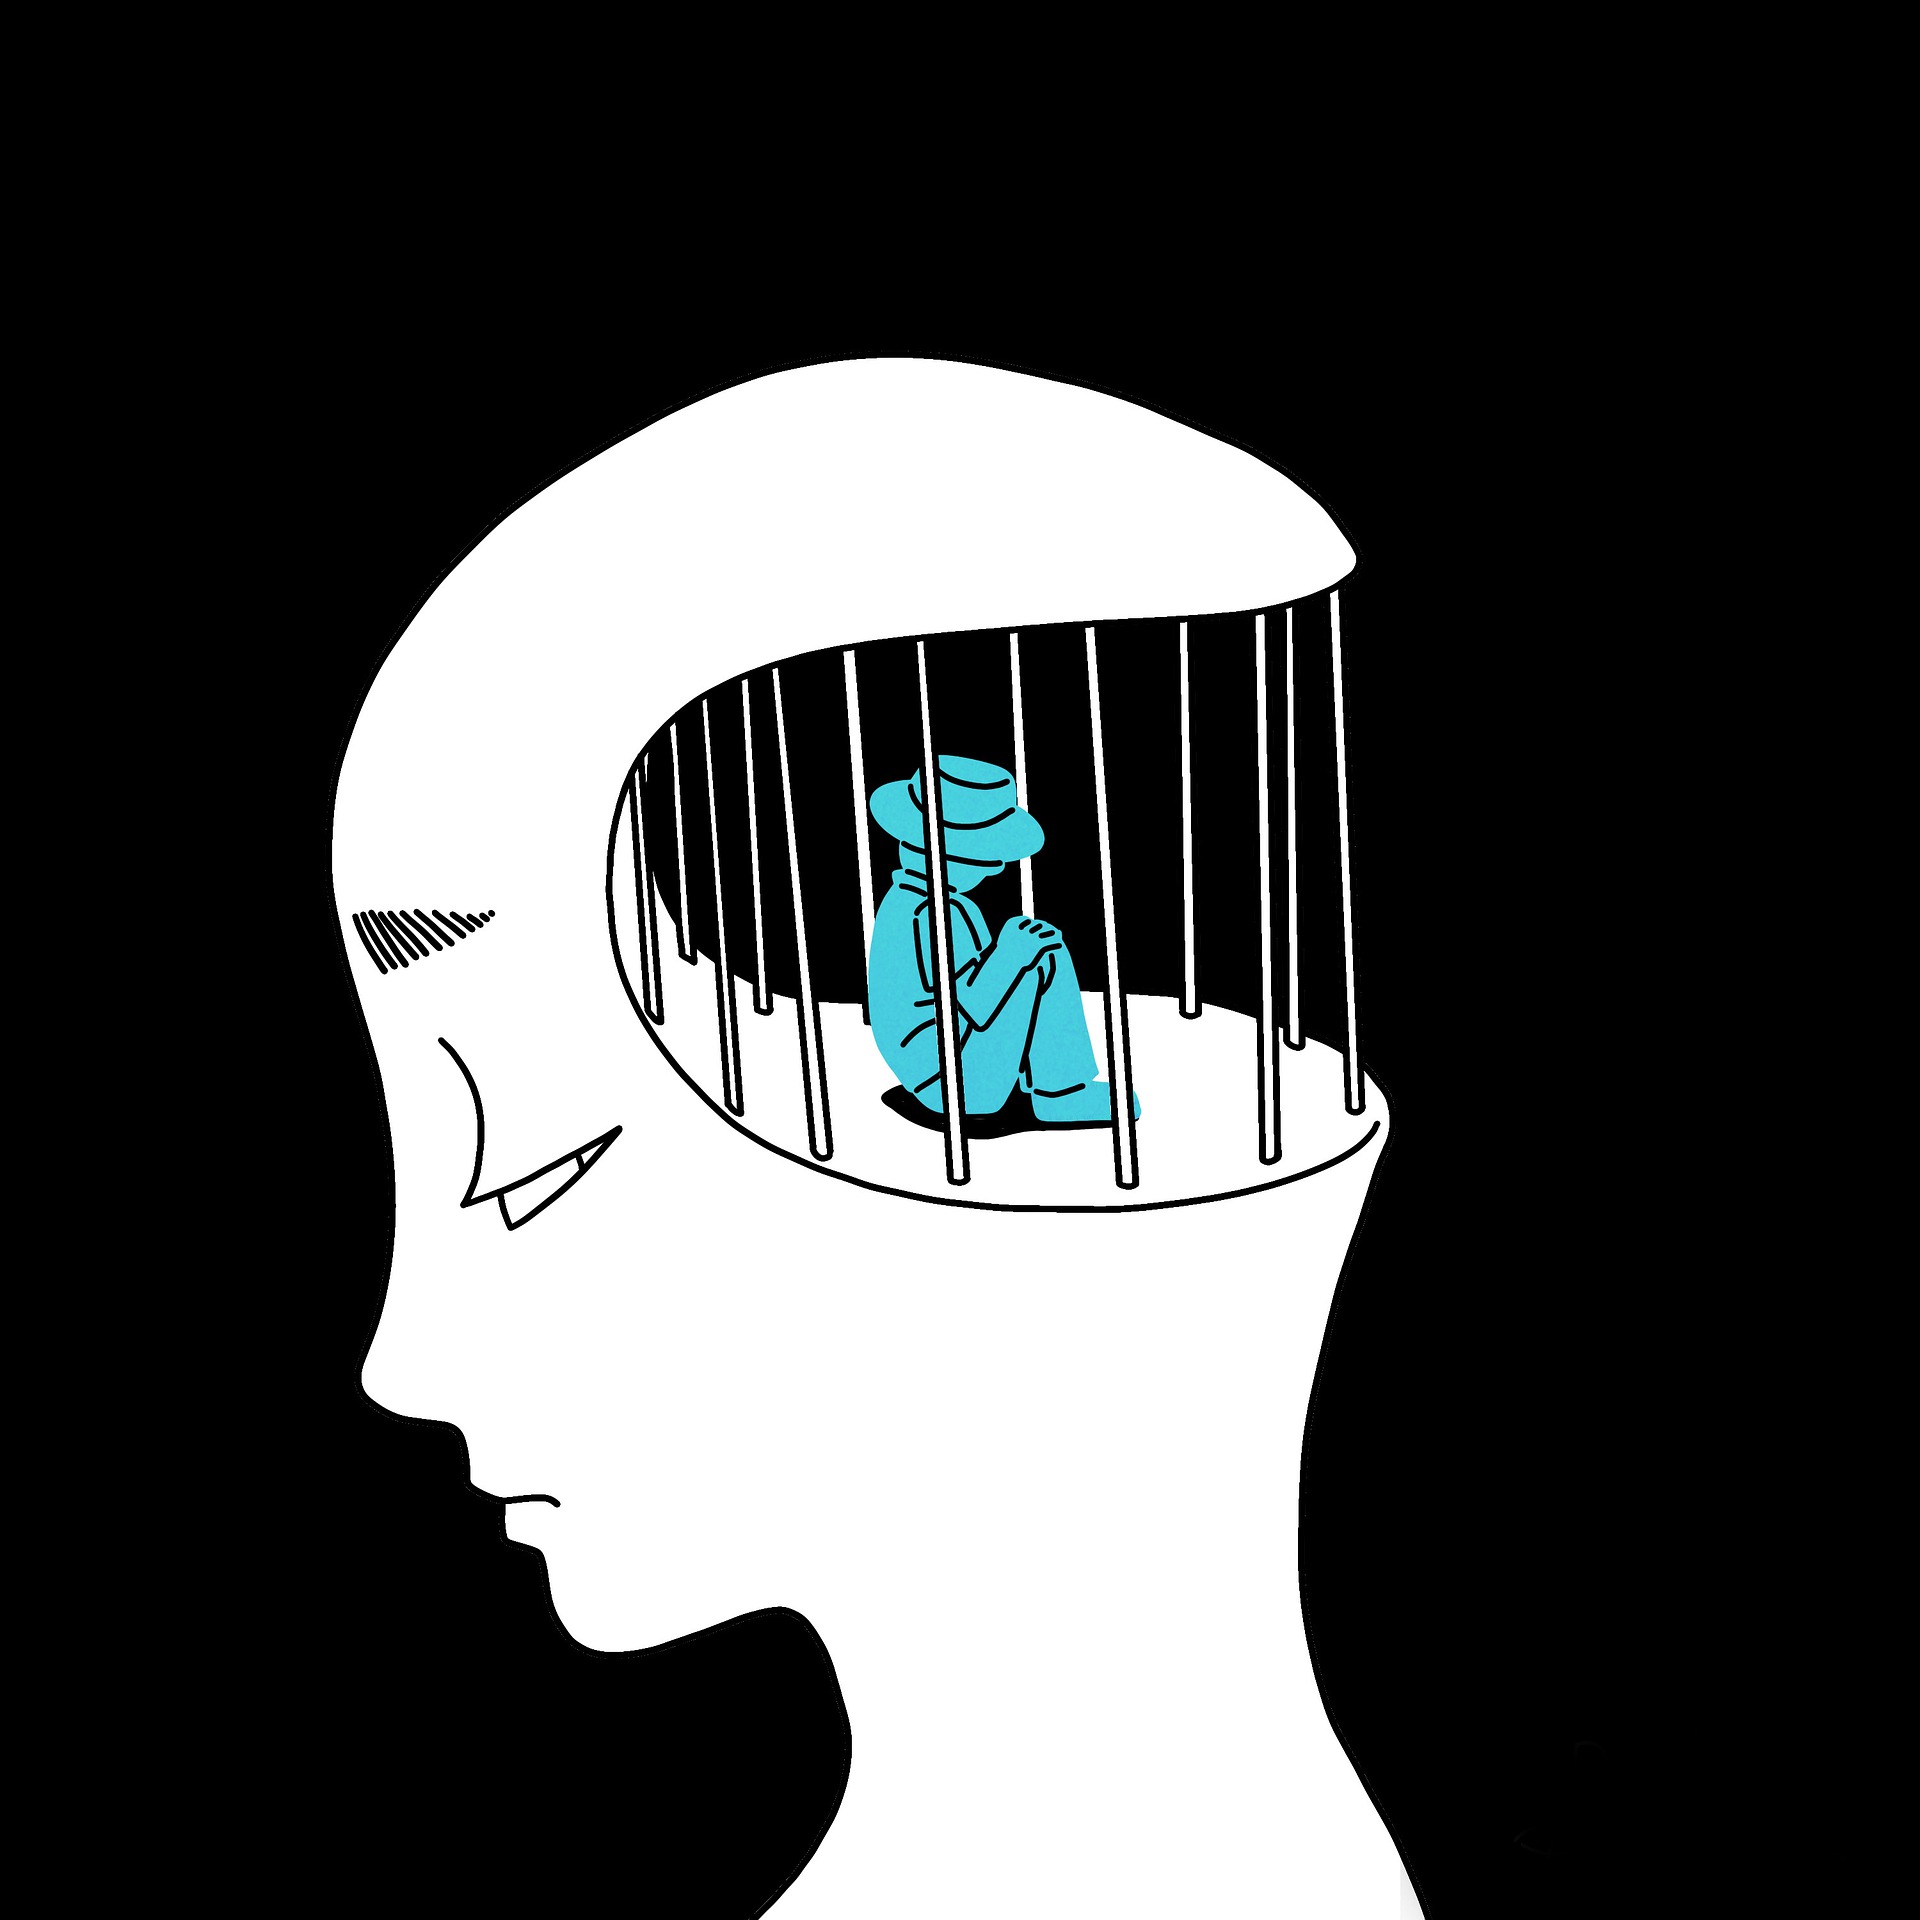 Illustrative style: shows a brain with someone inside it but behind a cage.